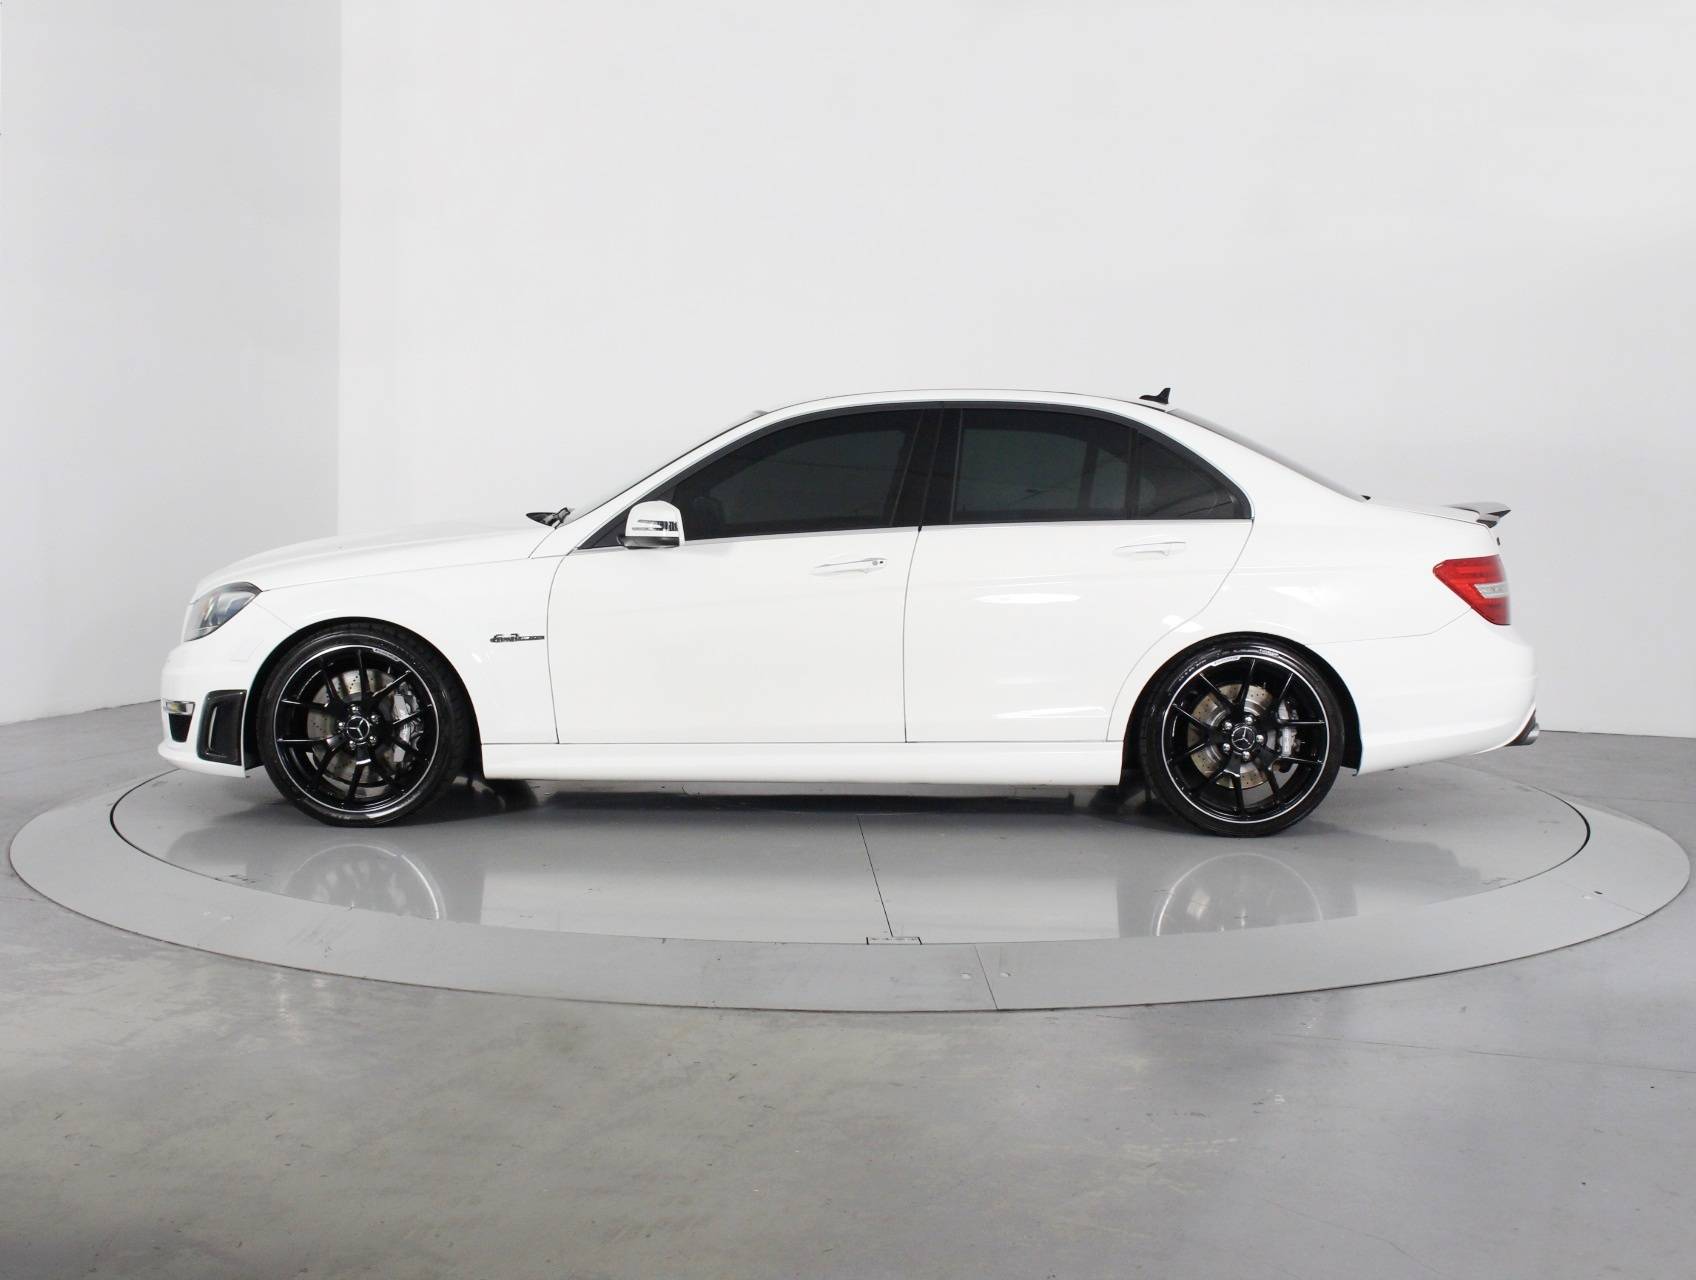 Used 2014 Mercedes Benz C Class C63 Amg Sedan For Sale In